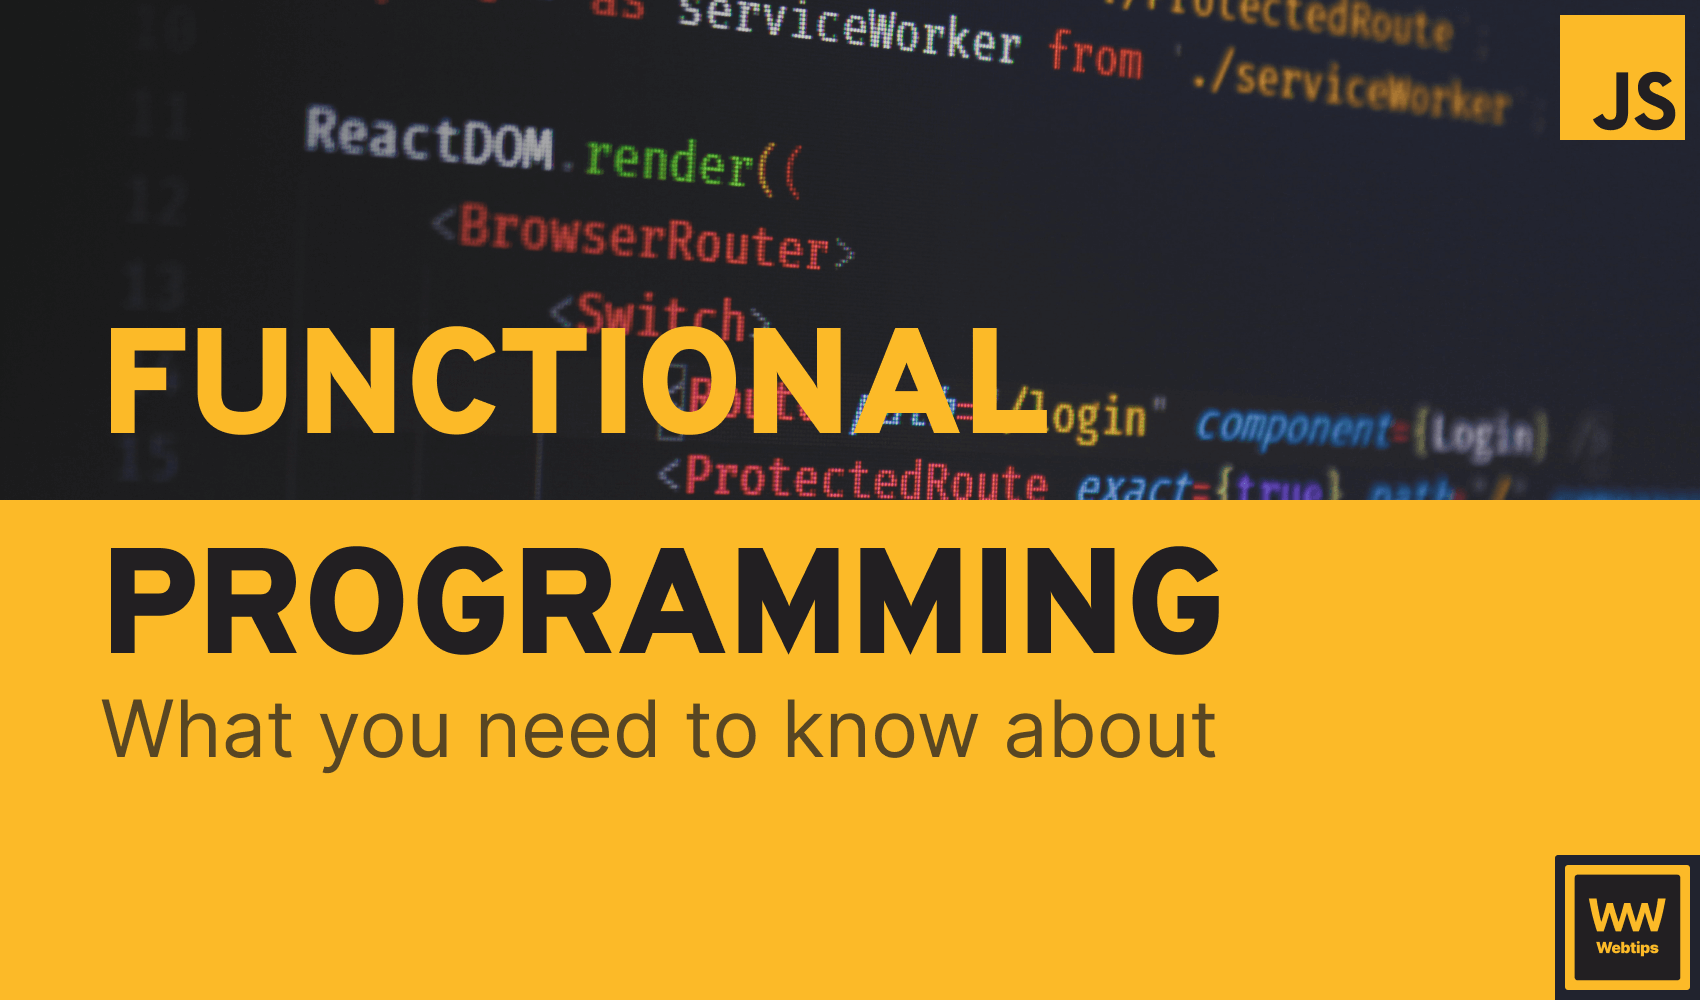 Why Do You Need to Know About Functional Programming?